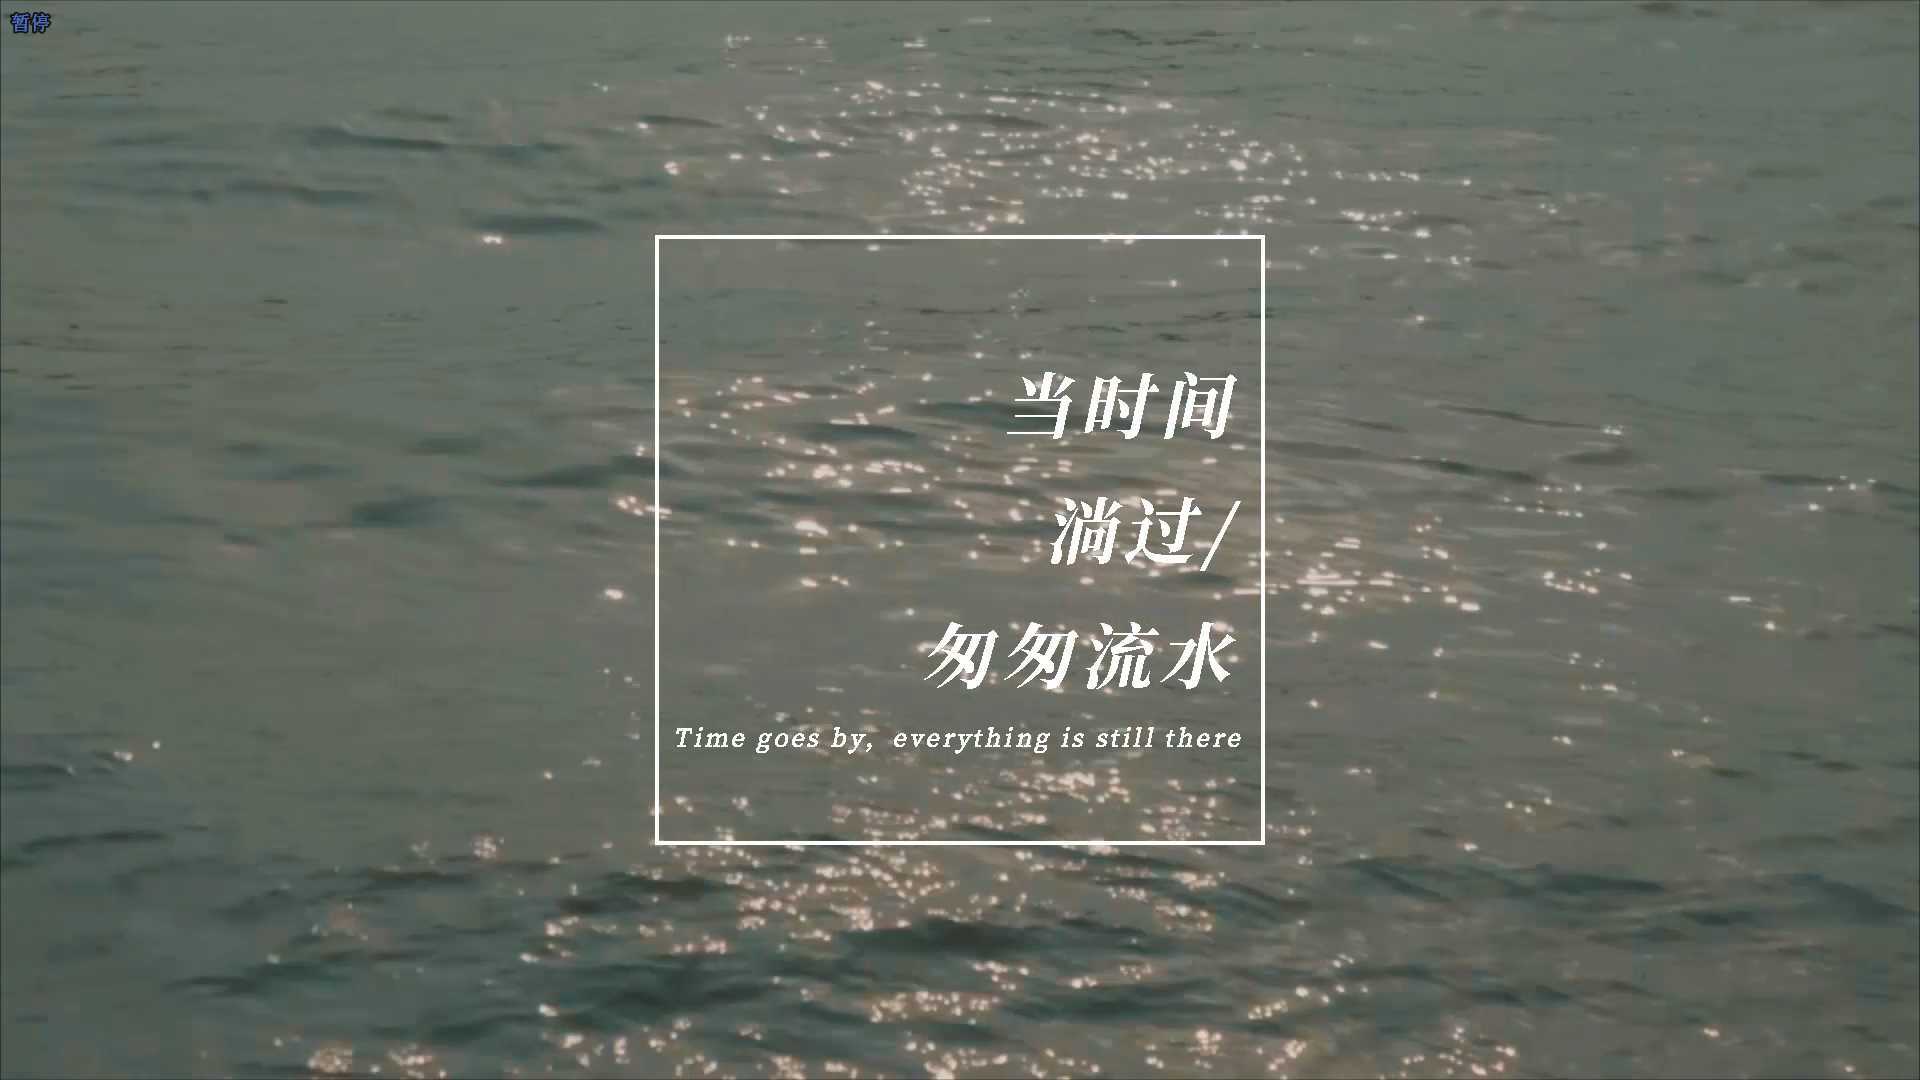 TIME GOES BY：当时间淌过匆匆流水